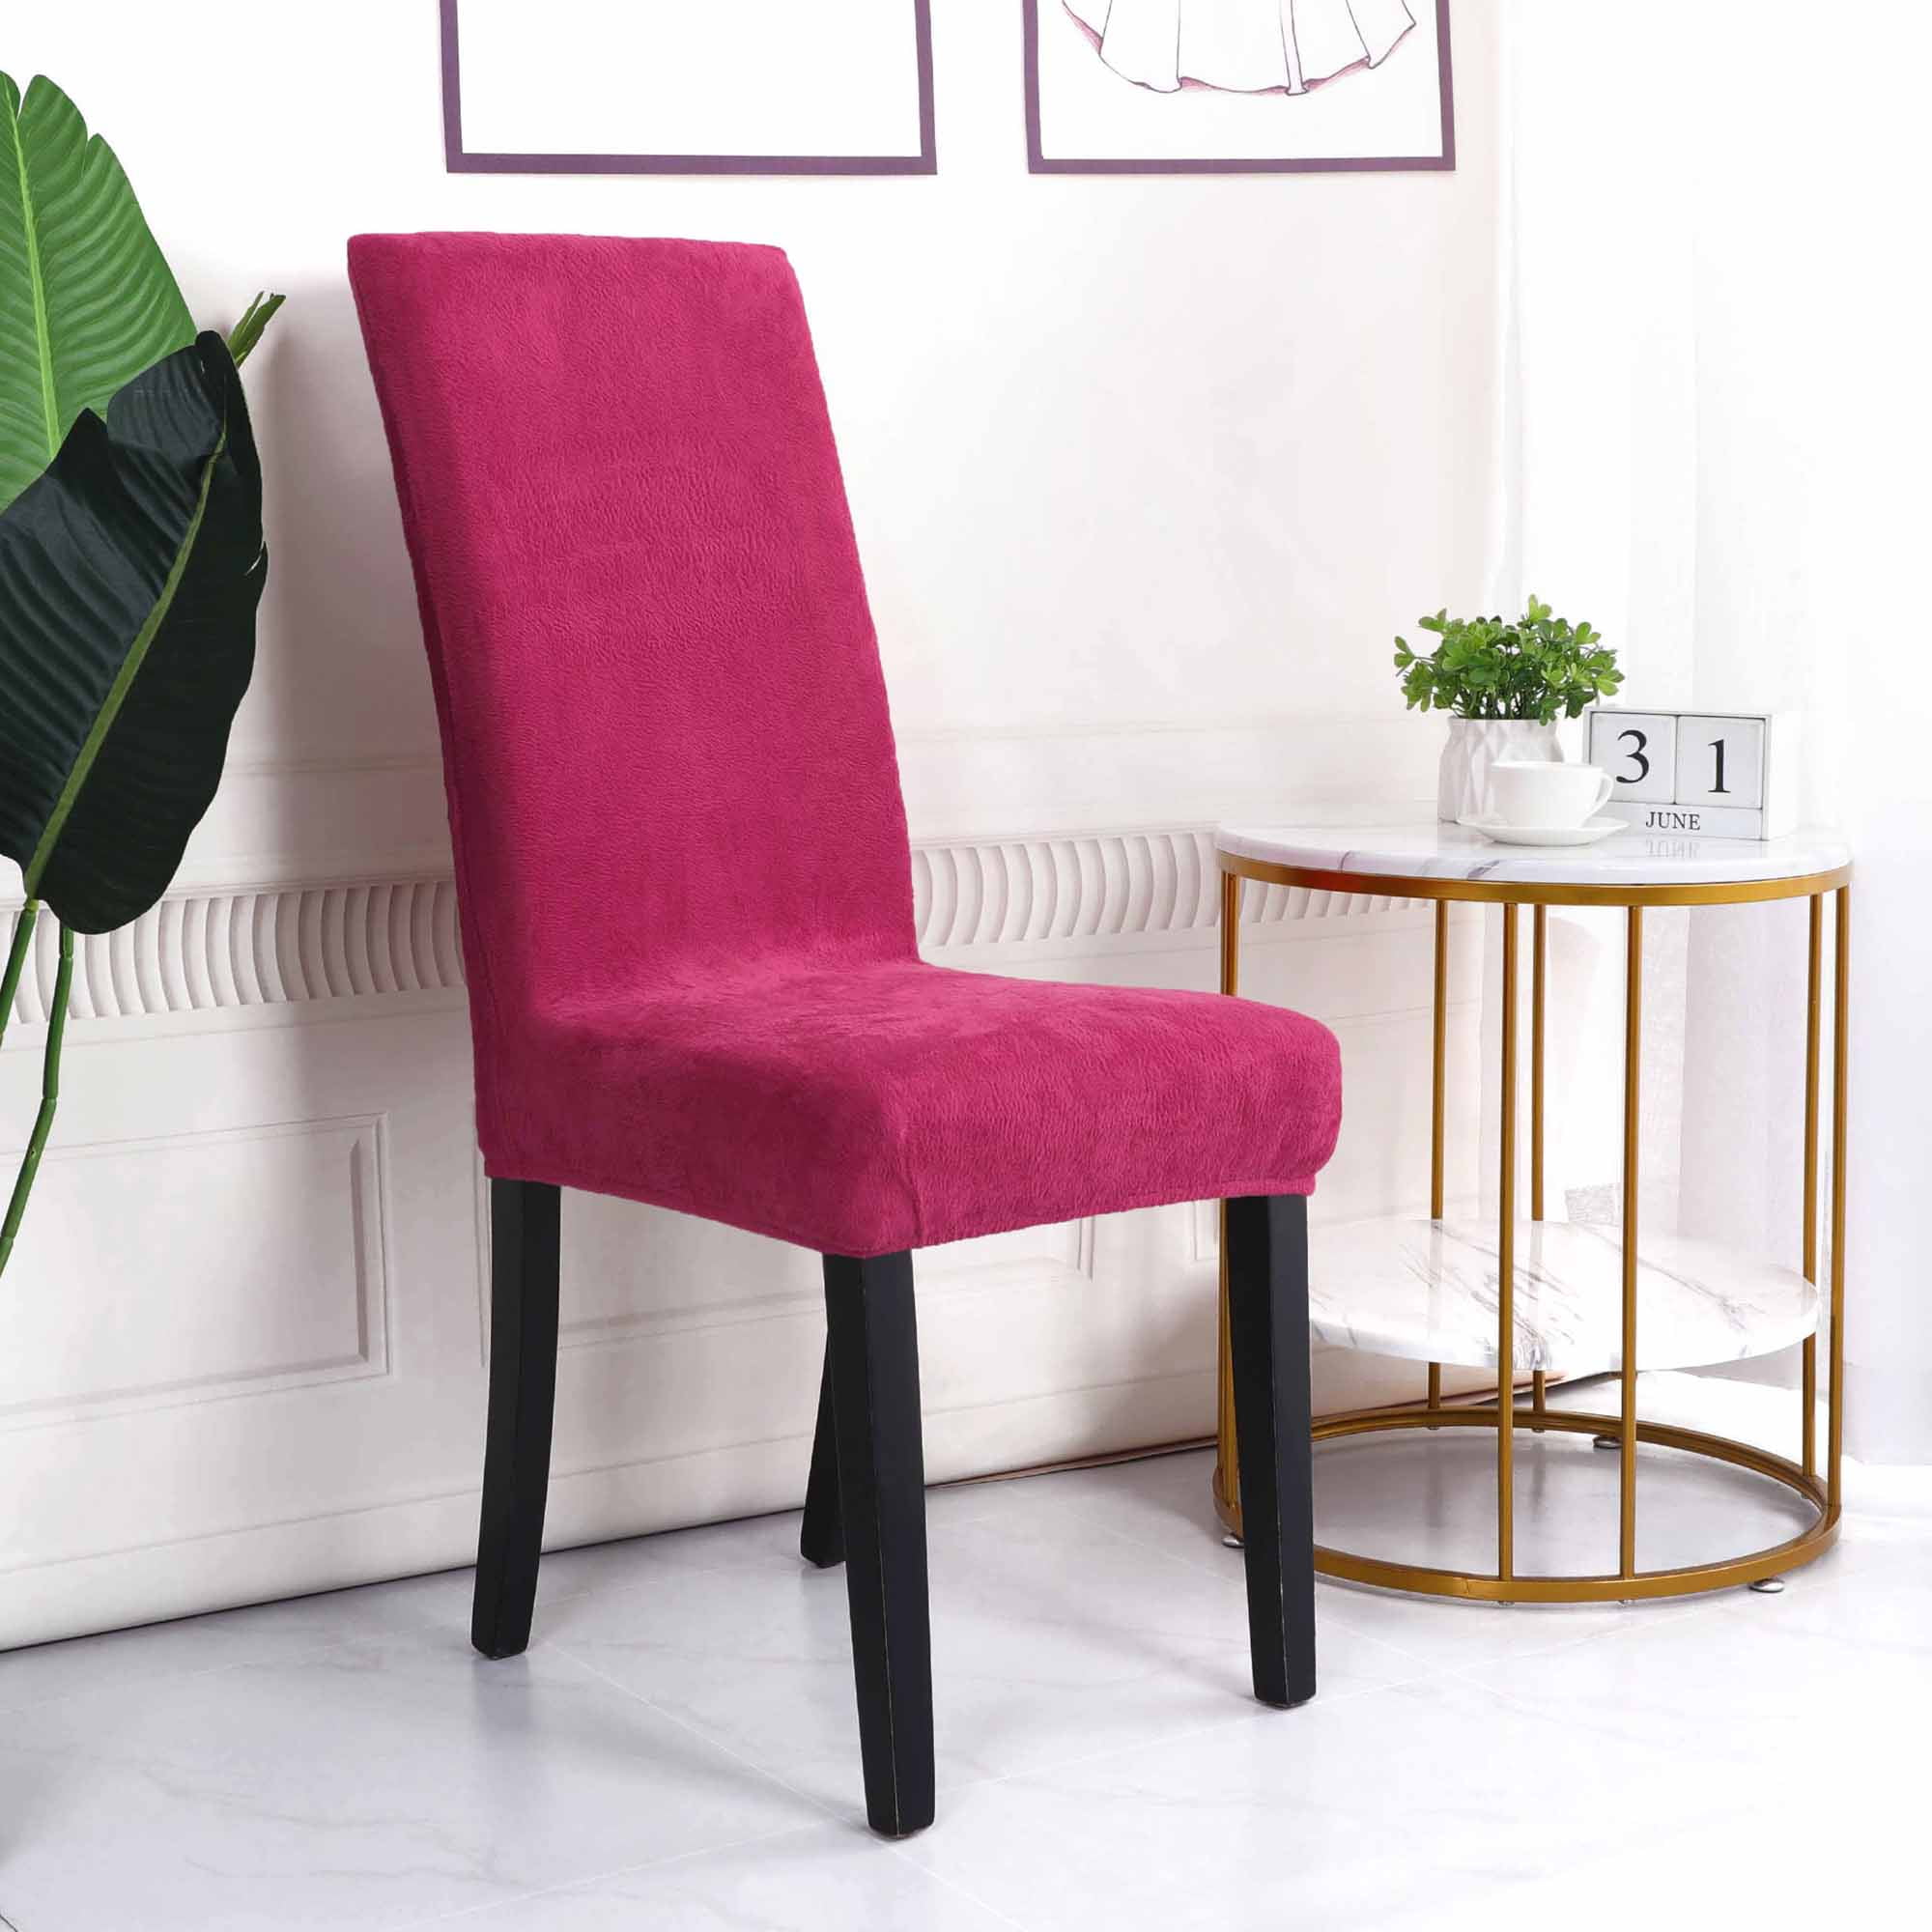 Details about   Stretch Velvet Round Chairs Seat Cover Solid Color Stool Slipcovers Home Decor 